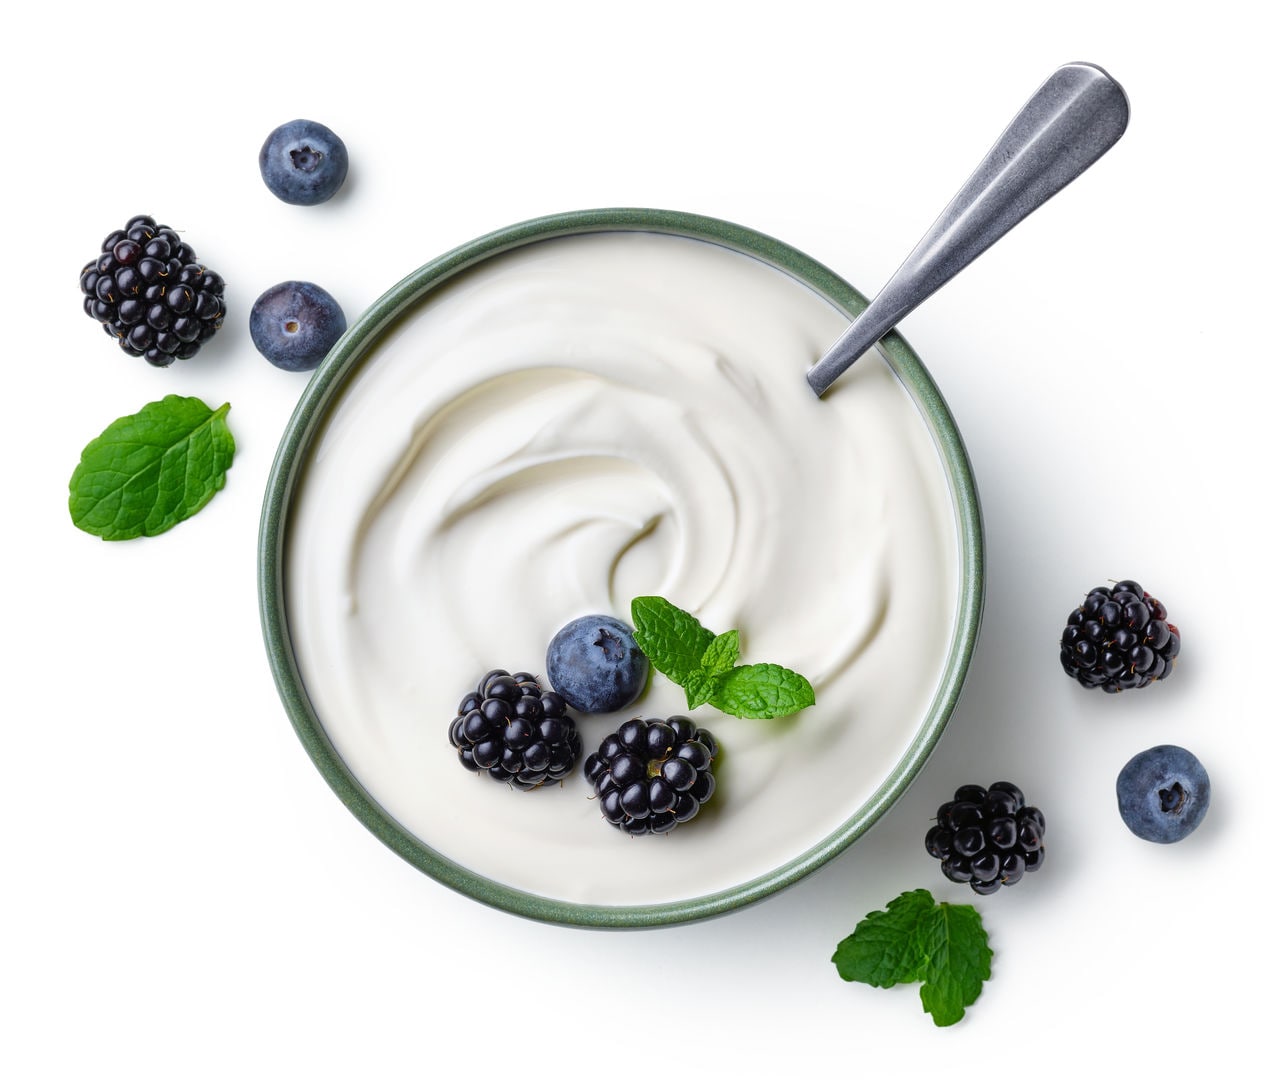 dsm-firmenich launches Delvo®Fresh starter cultures for impressive pH stability throughout indulgent mild yogurt production and shelf life